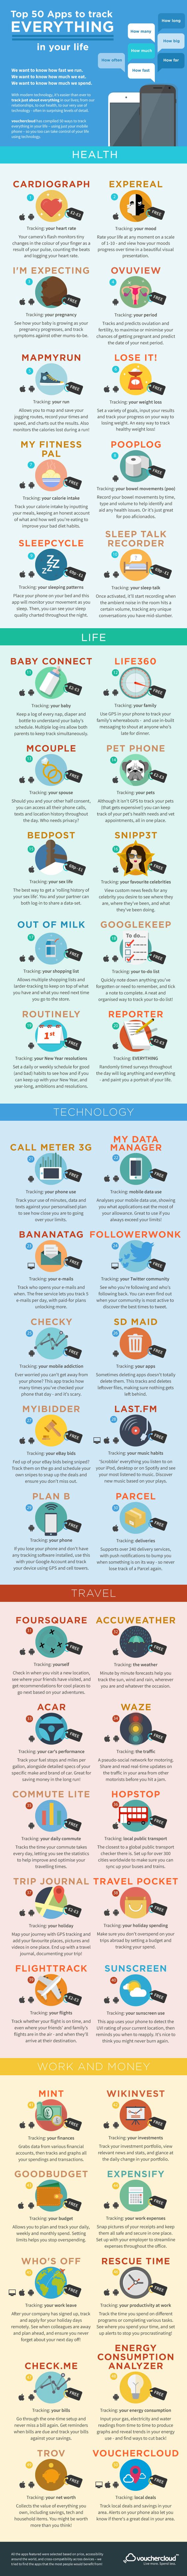 50 Mobile #Apps to Track Everything in your life - #infographic #socialmedia